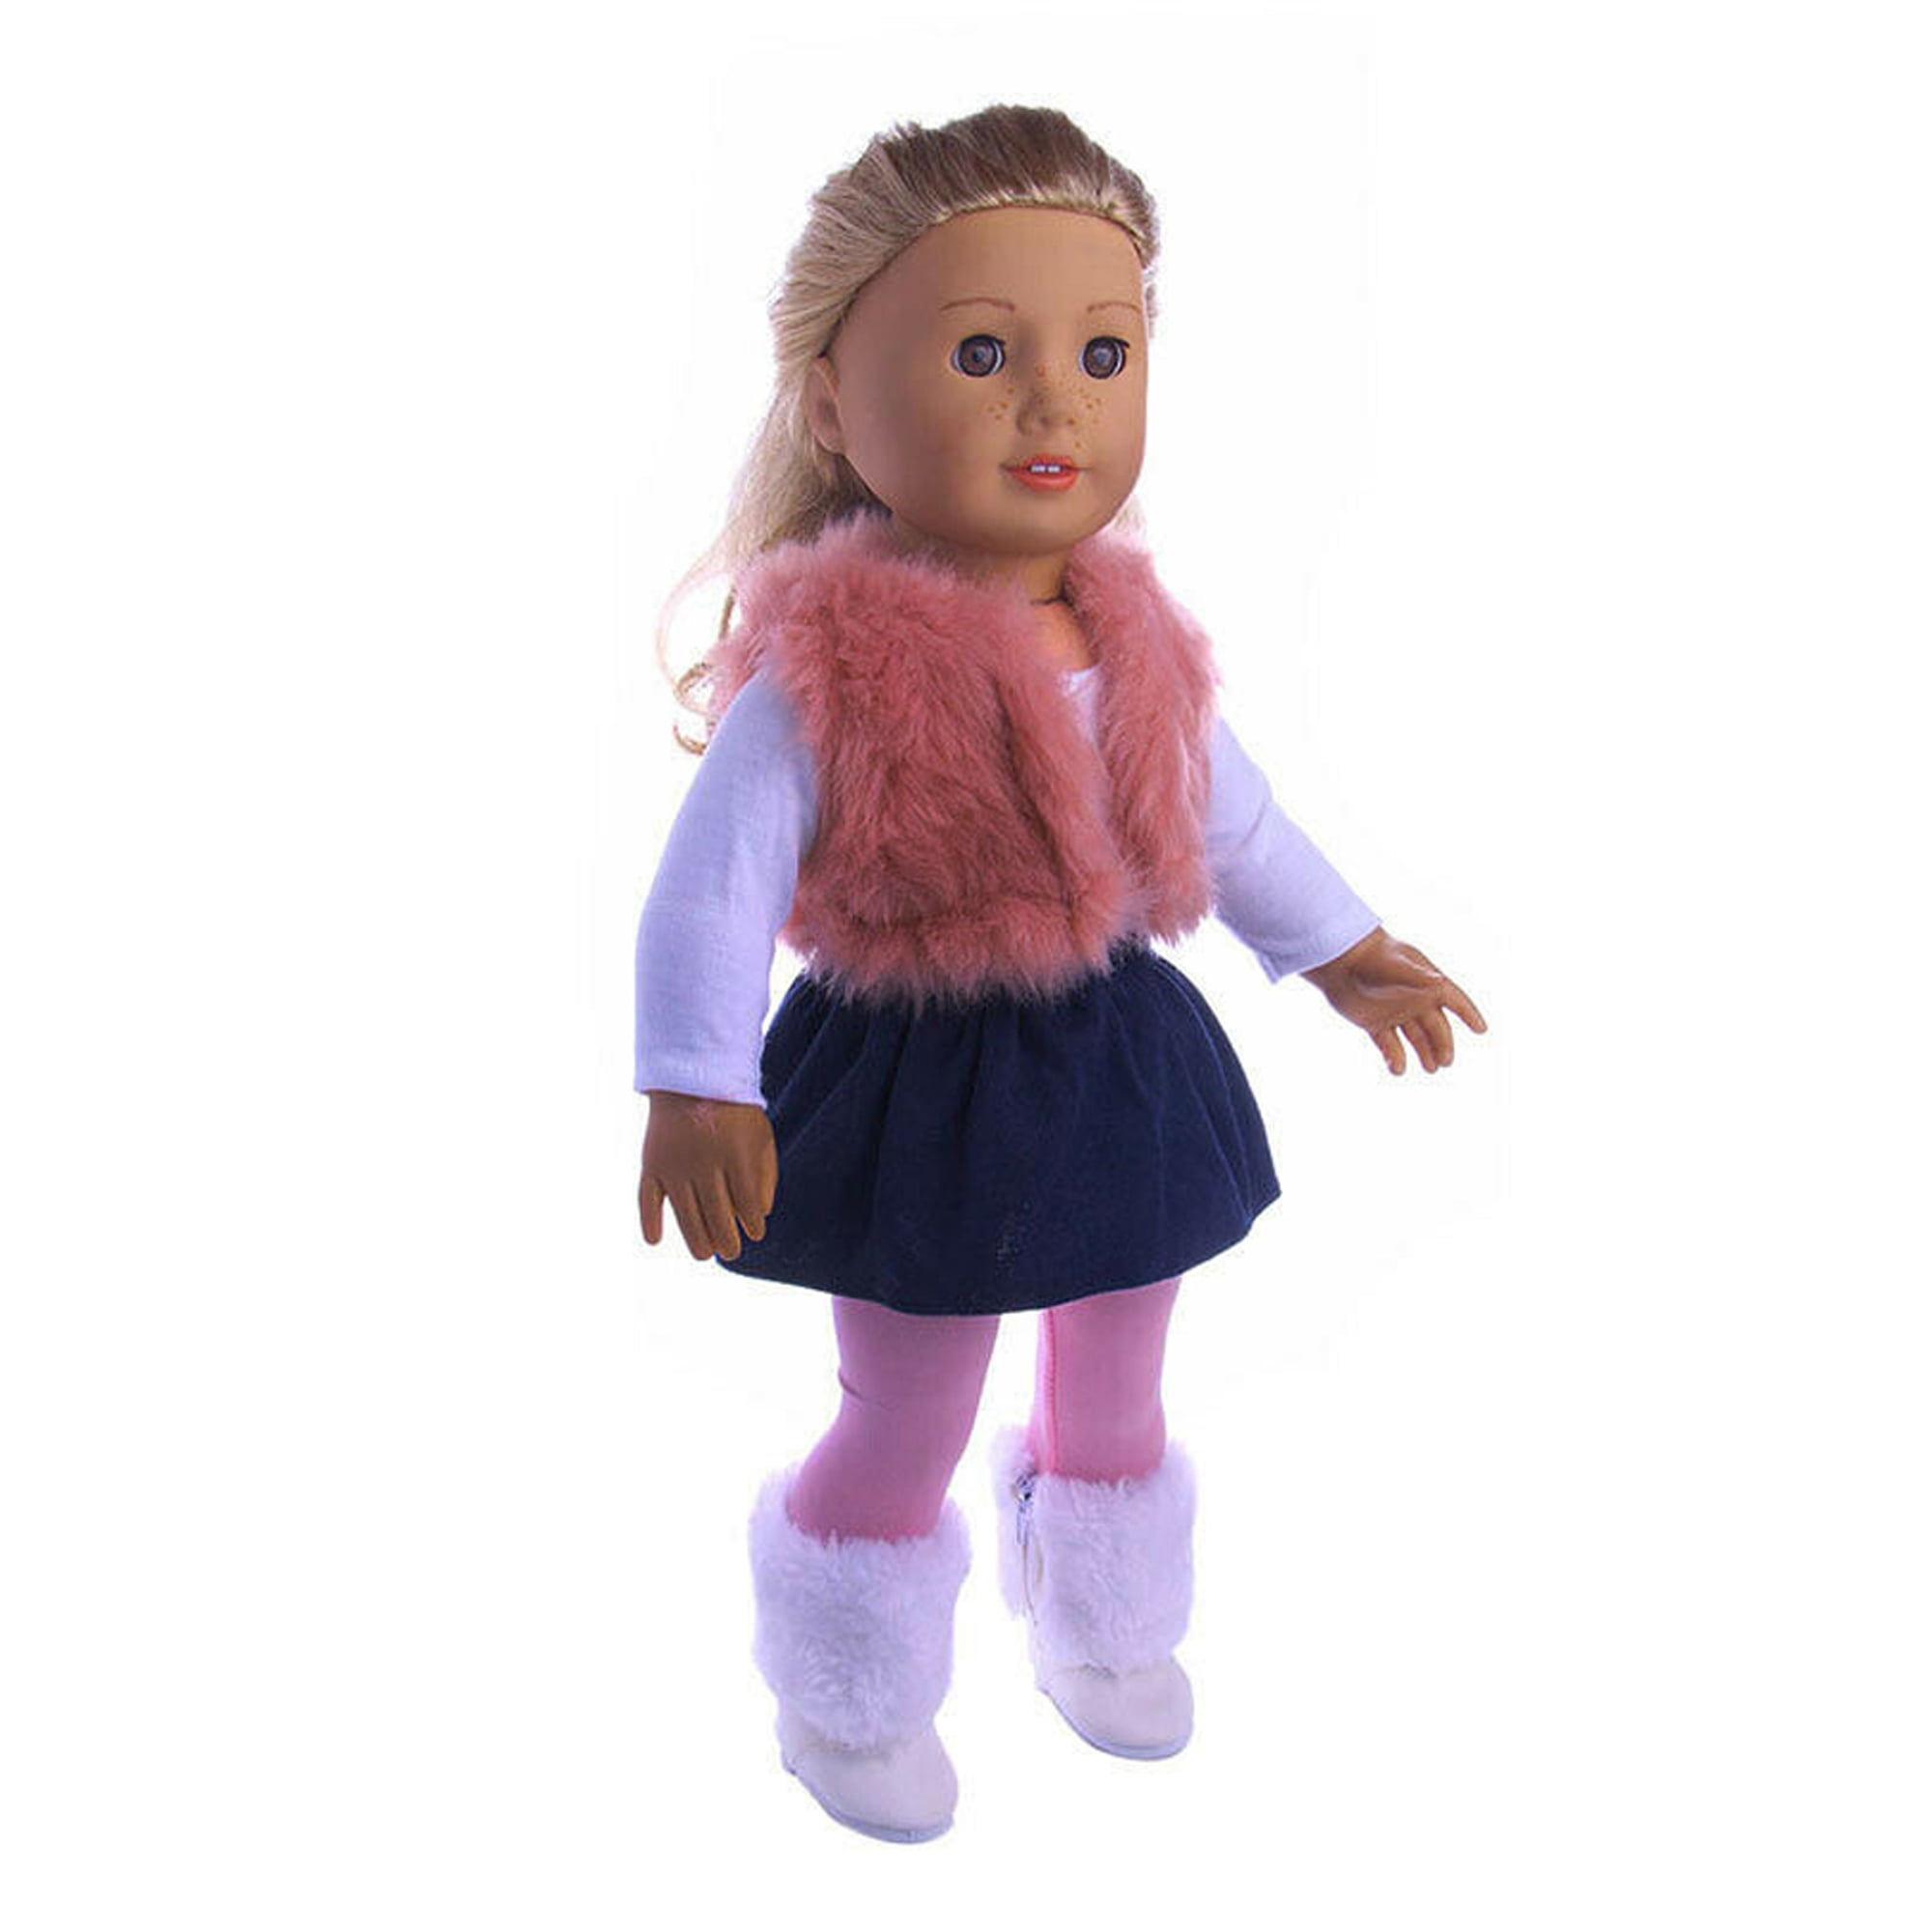 AMERICAN GIRL OUR GENERATION RAINBOW UNICORN SKIRT AND TOP 18 INCH DOLL CLOTHES 